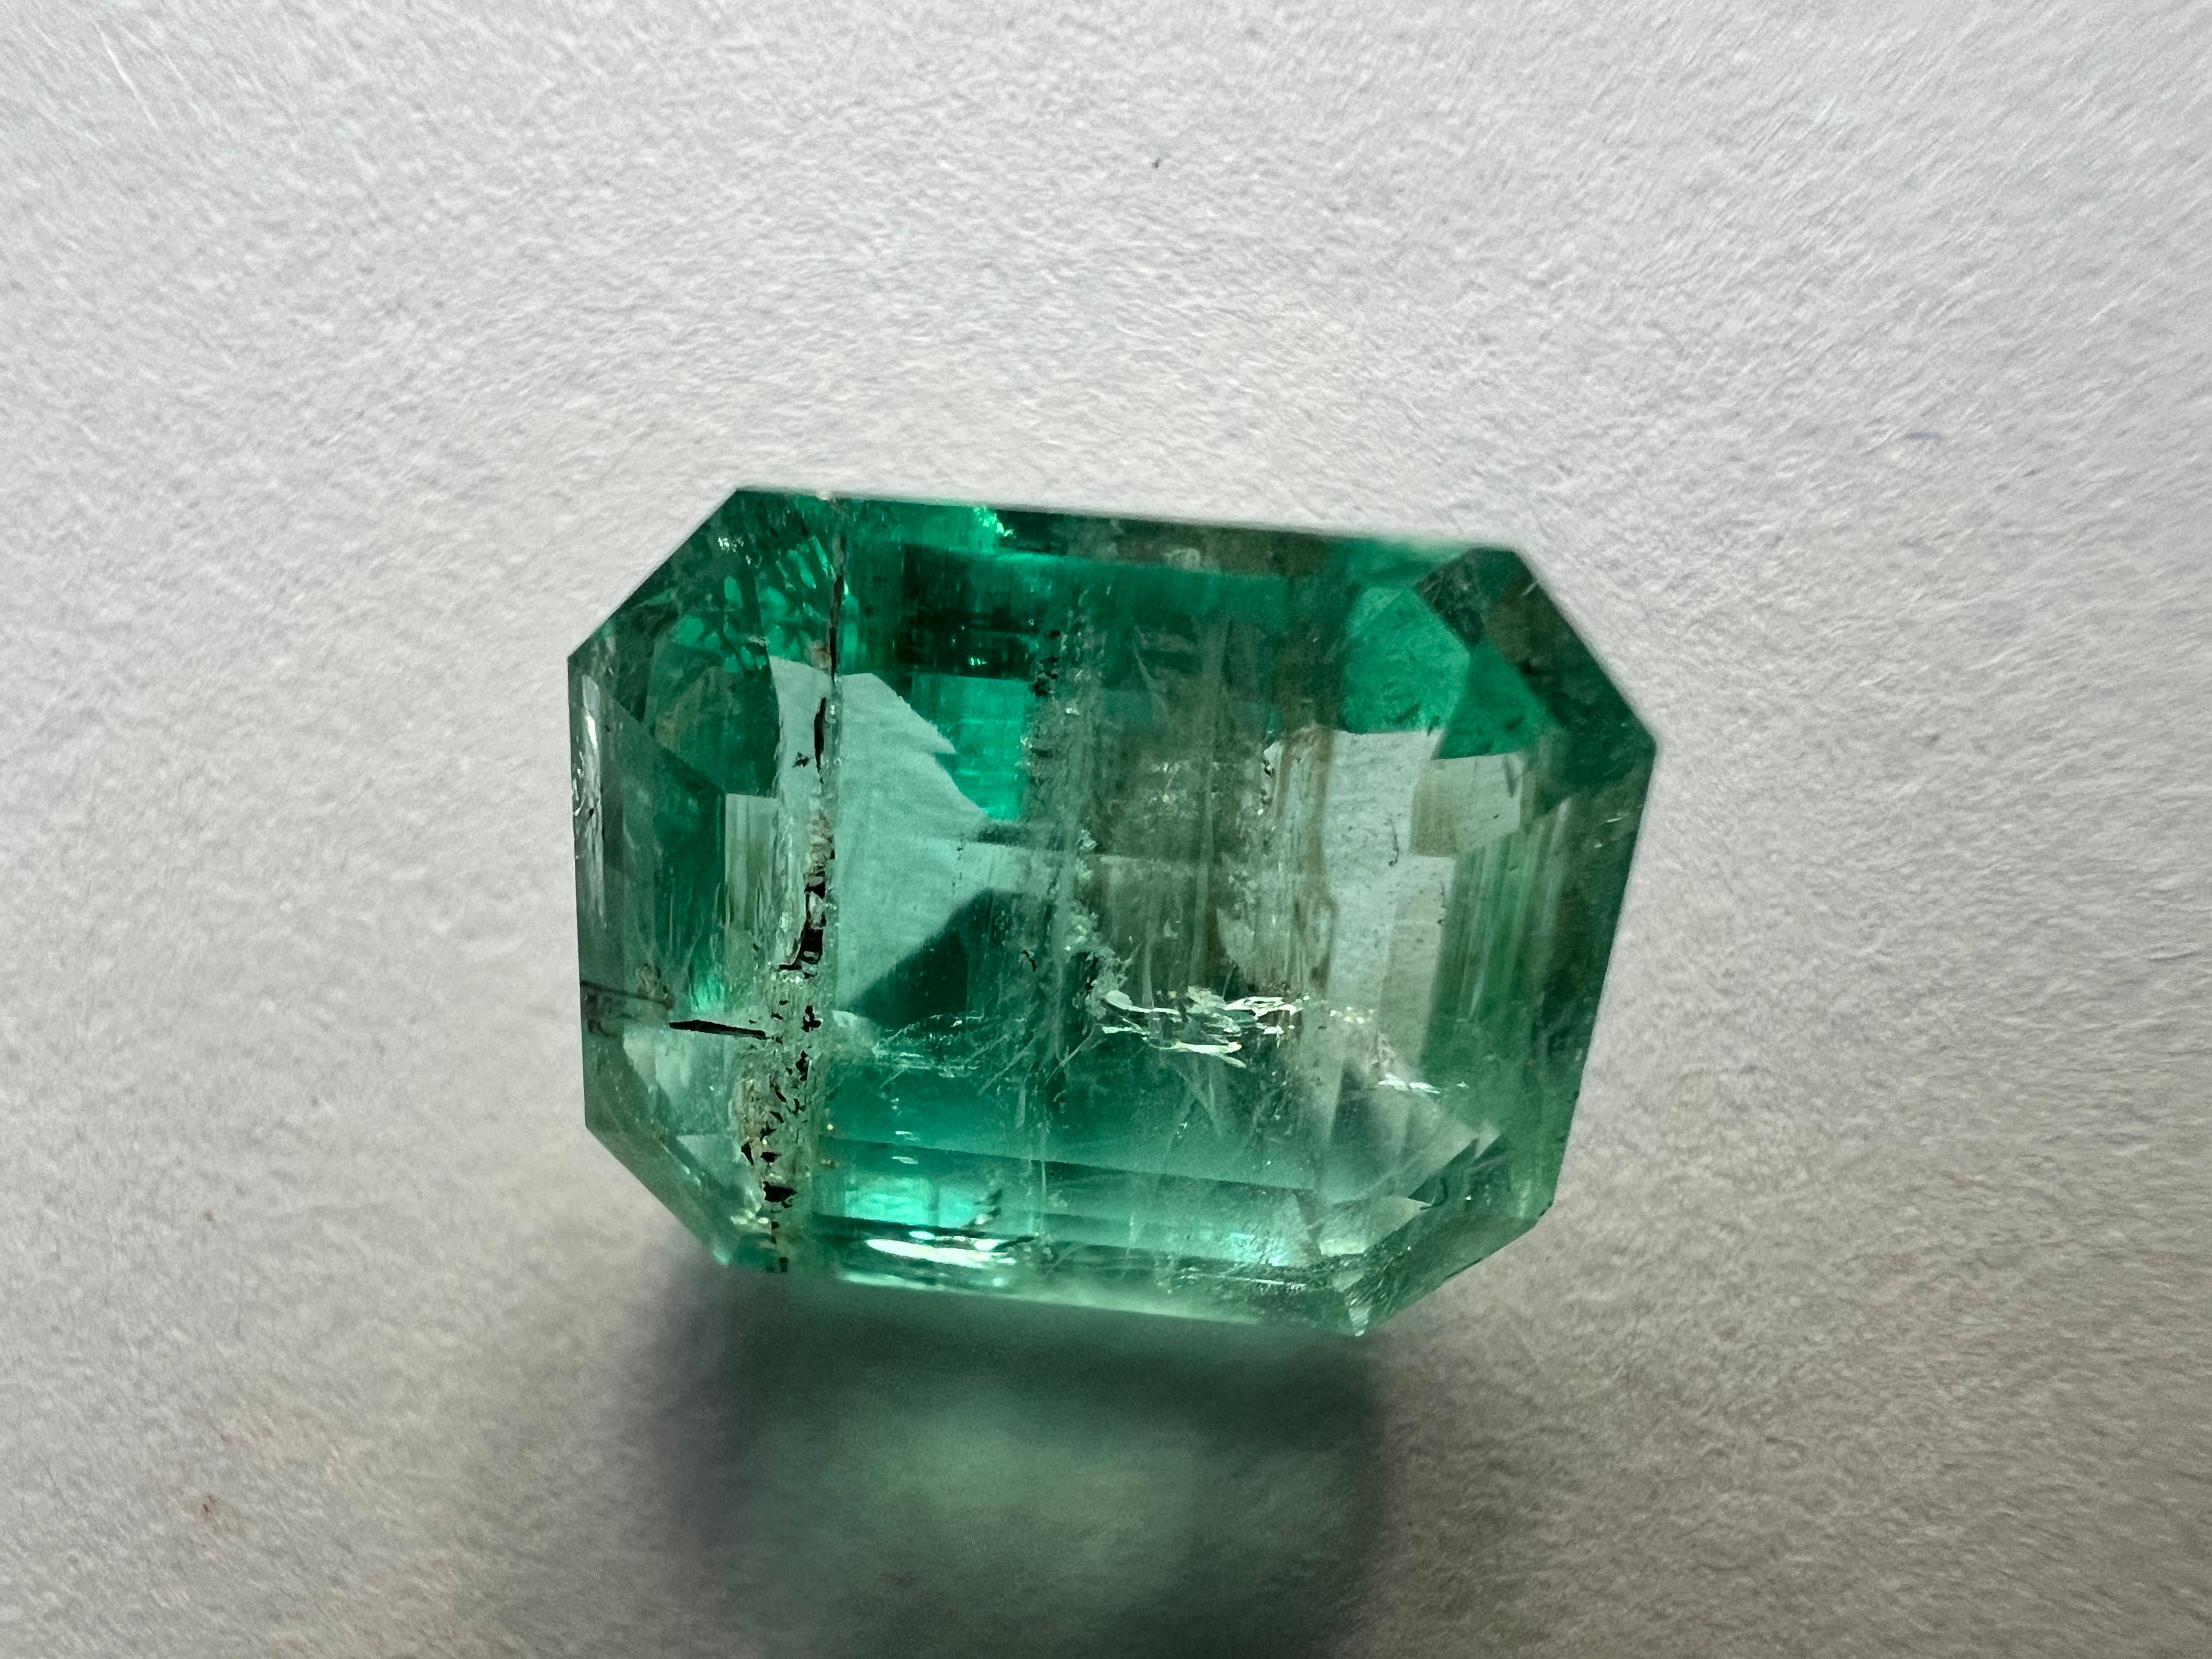 Introducing the beauty of our Natural Untreated  6.47ct  Natural Emerald Loose Gemstone. This exquisite emerald is a true gem of nature, with lush green hues and a radiant cut that promises to make any piece of jewelry a true work of art.

Gemstone